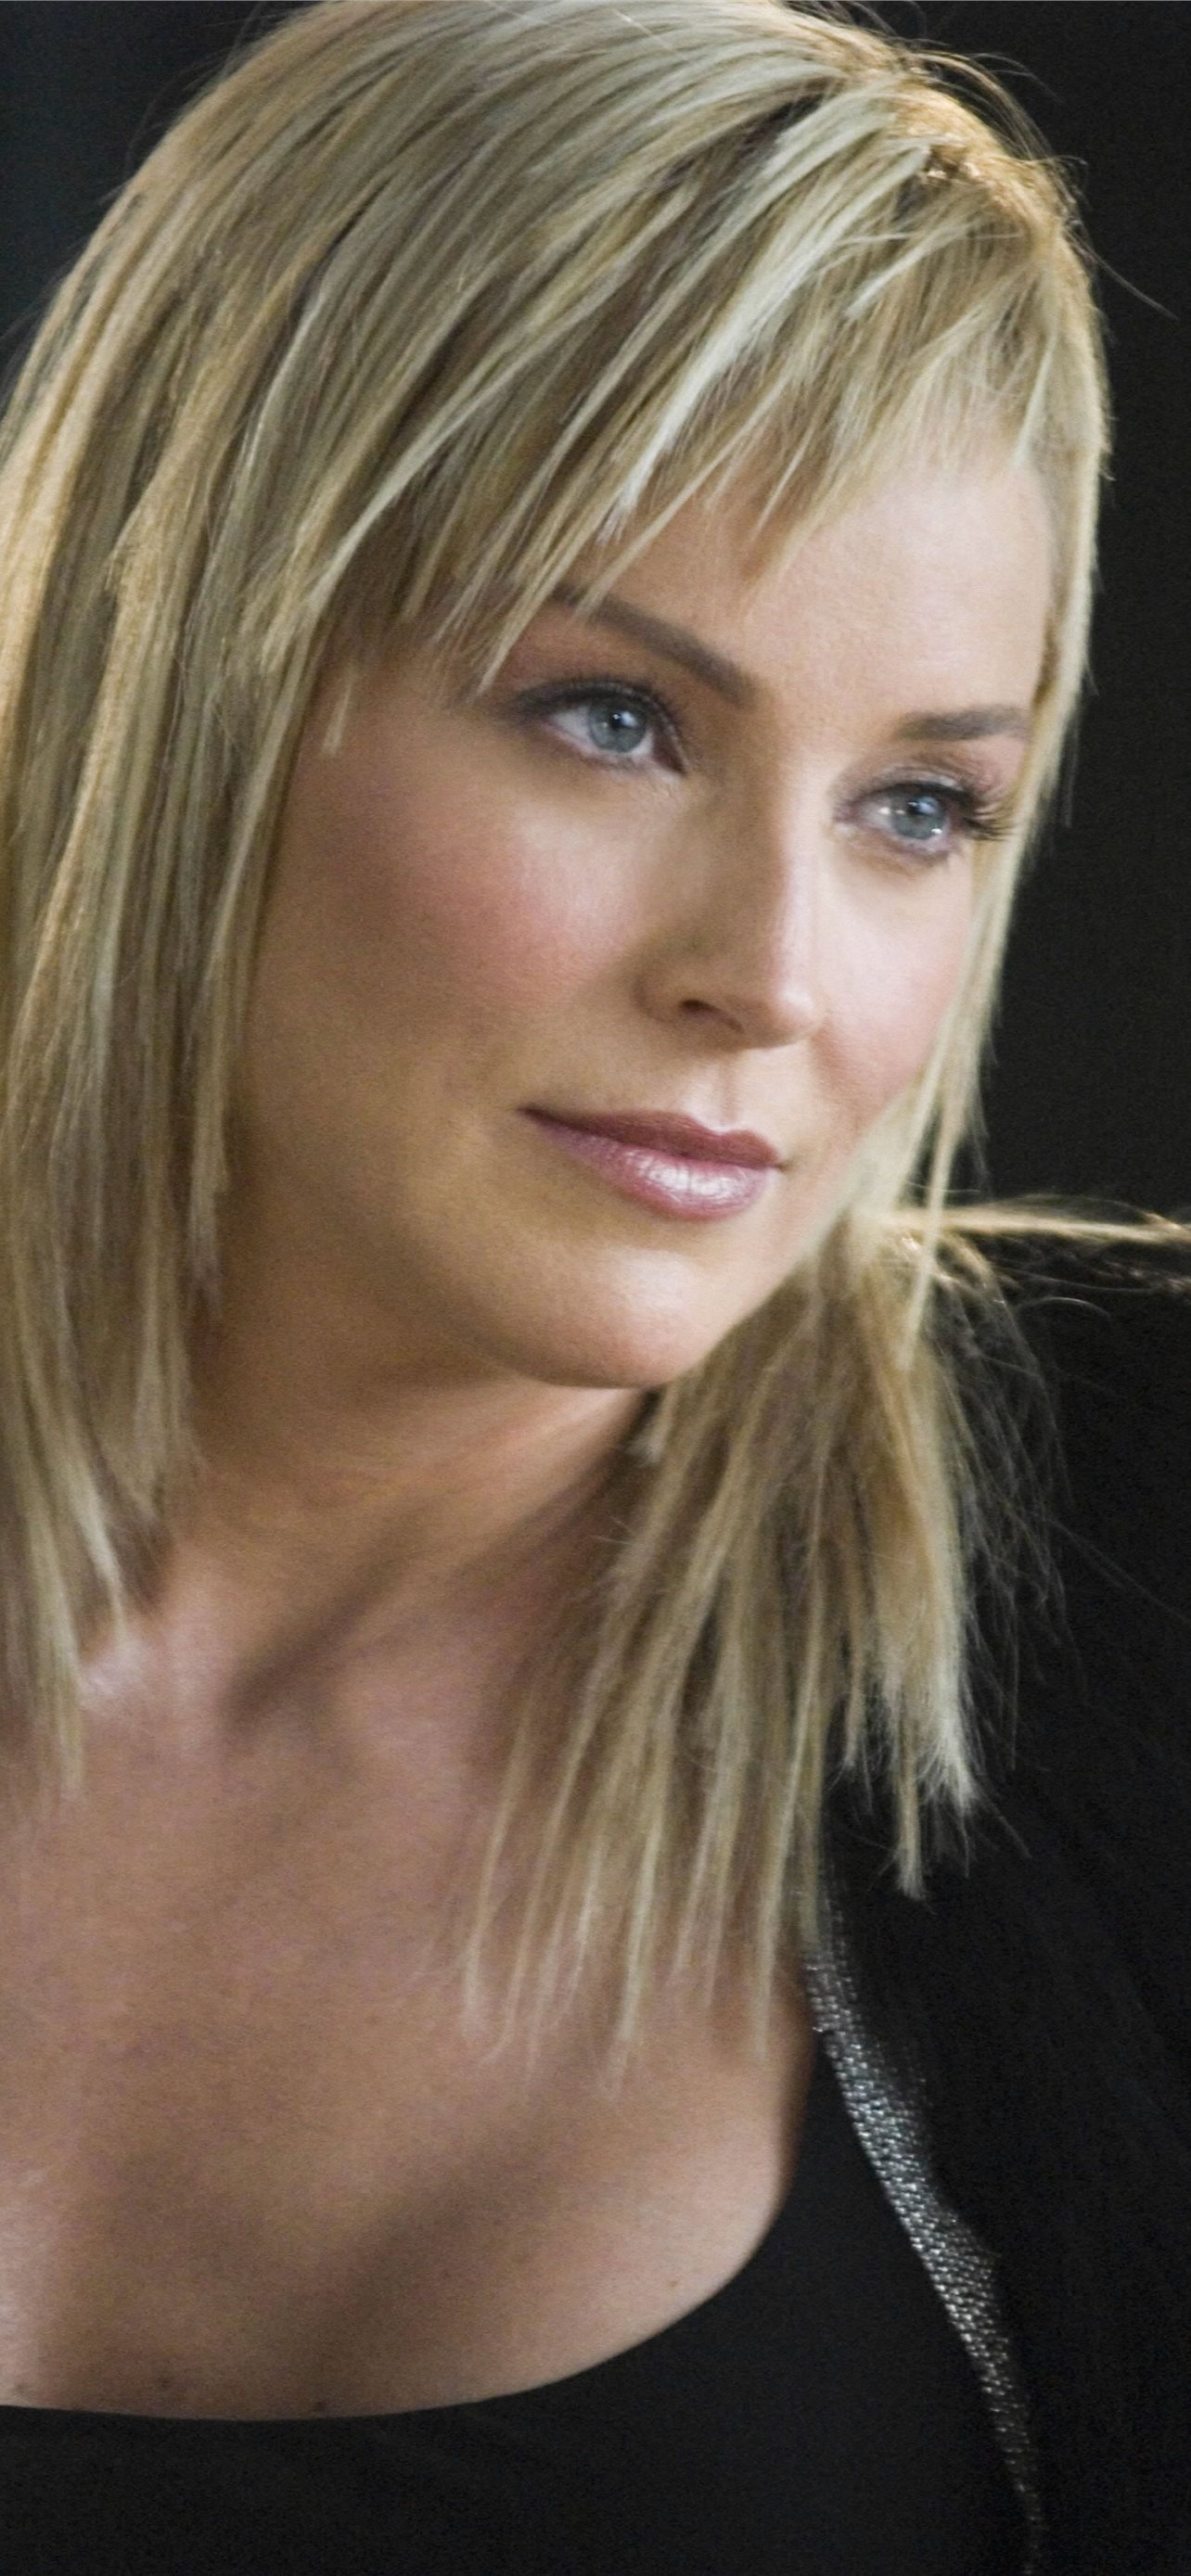 Sharon Stone, Best wallpapers, iPhone HD wallpapers, Hollywood beauty, 1290x2780 HD Phone